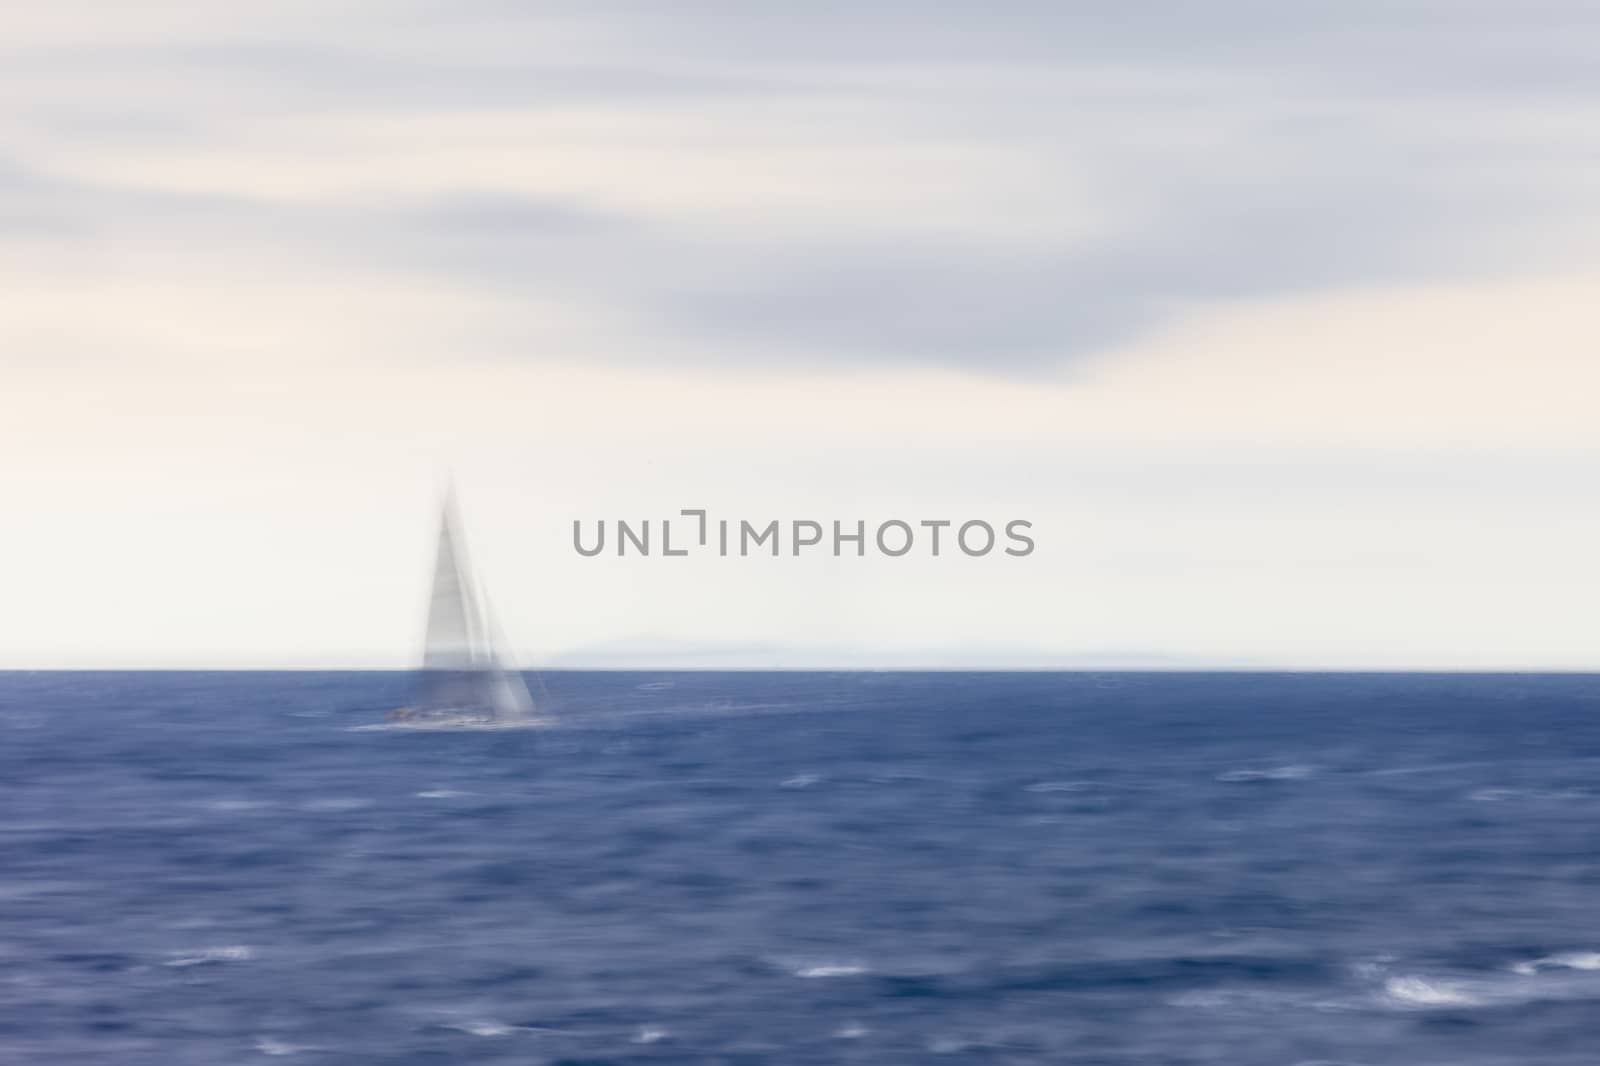 A calm and suggestive scenario with a sailboat navigating at sunset